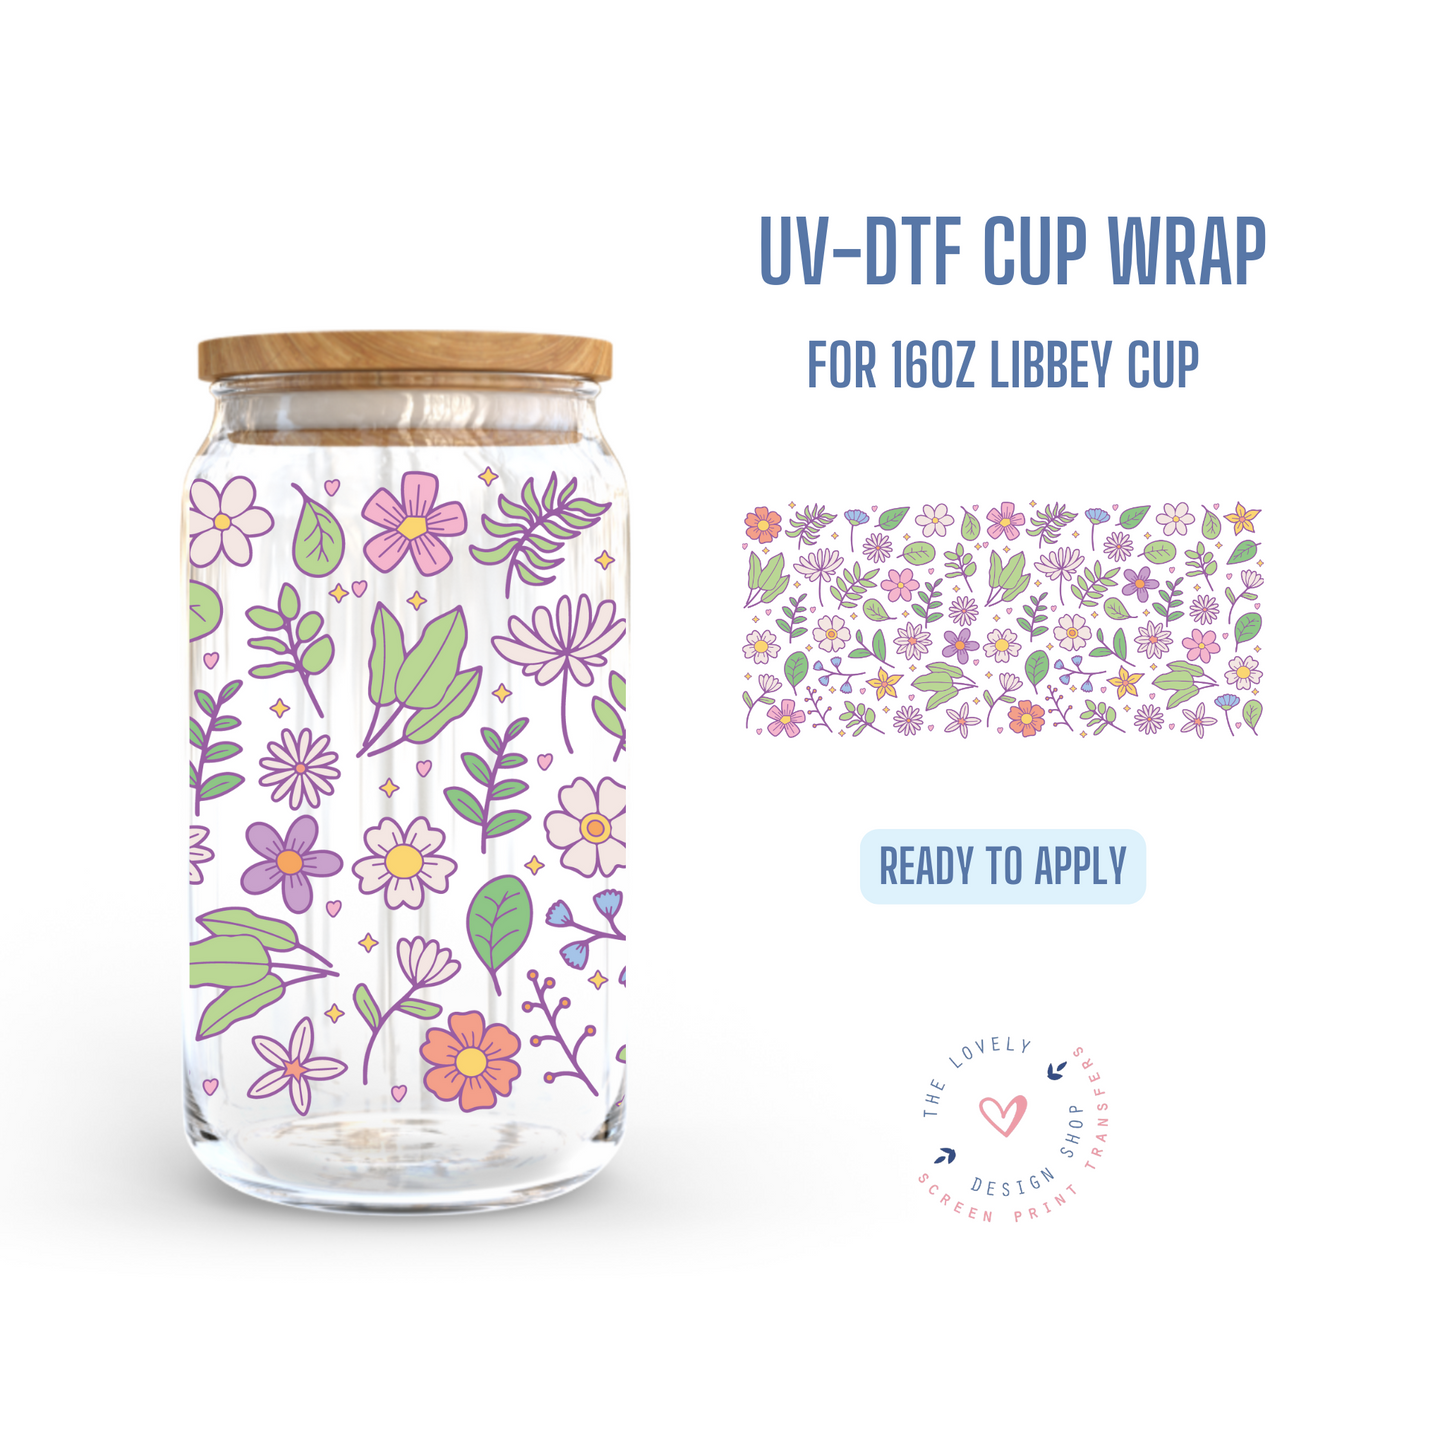 Flowers & Leaves - UV DTF 16 oz Libbey Cup Wrap (Ready to Ship) Apr 22